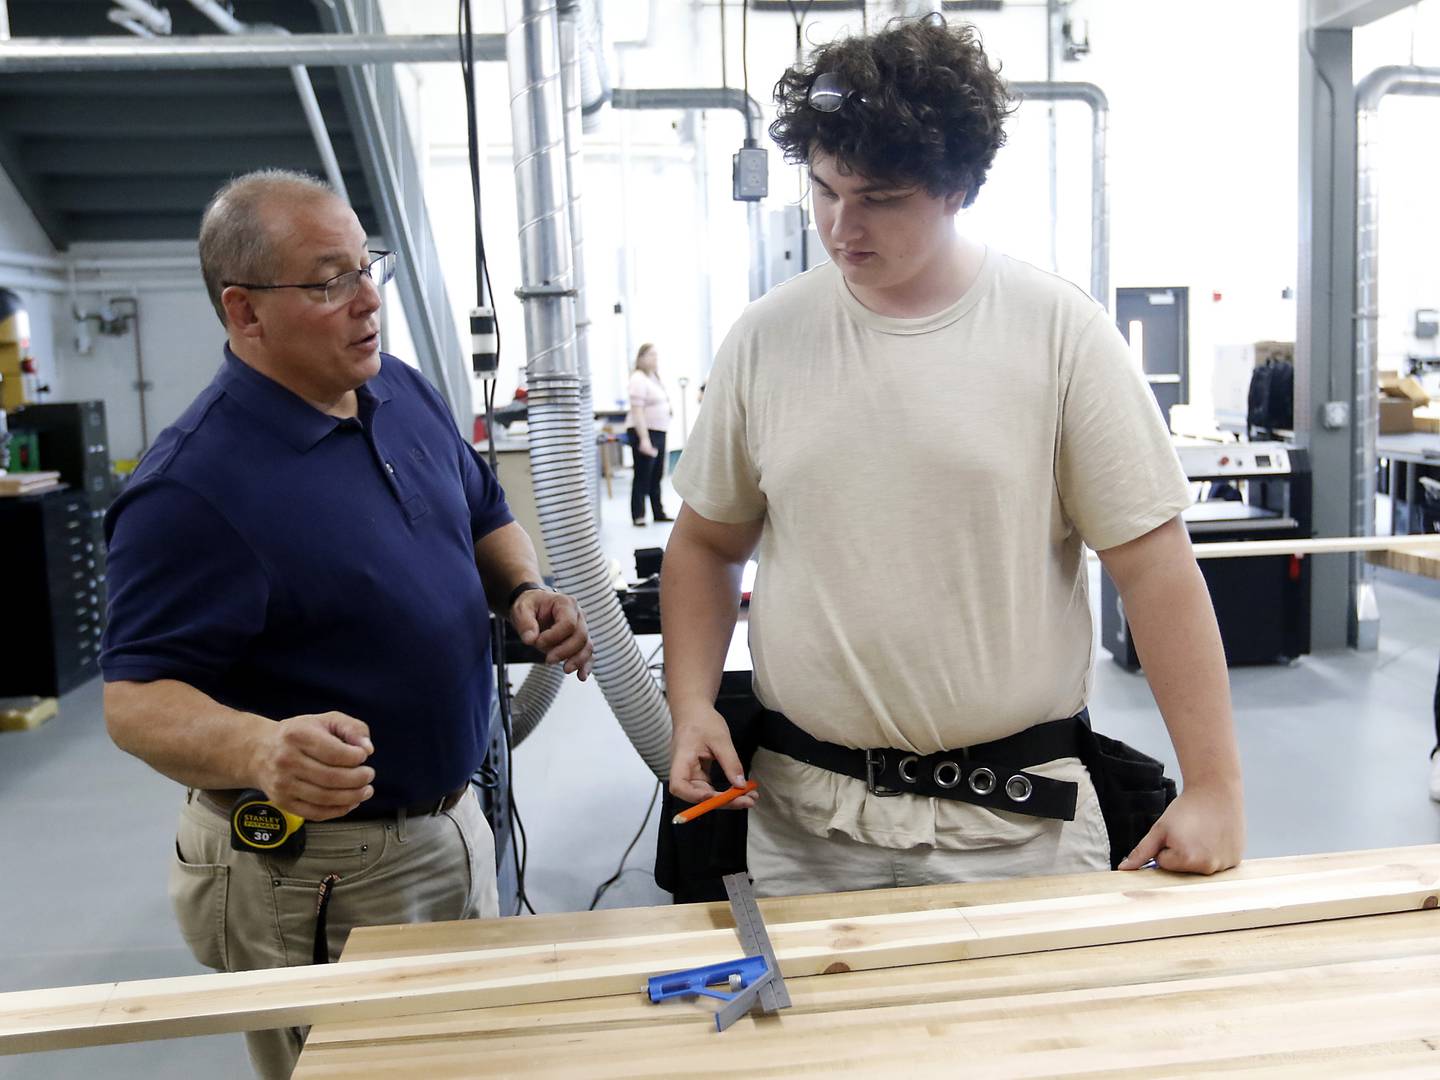 Teacher Dan Rohman talks with student David Mey as he teaches his construction trades students how to measure out a board to build a wall on Tuesday, Aug. 30, 2022, during class at McHenry High School. The students in the class will build the tiny shops that will house incubator retail businesses on McHenry's Riverwalk at Miller Point.